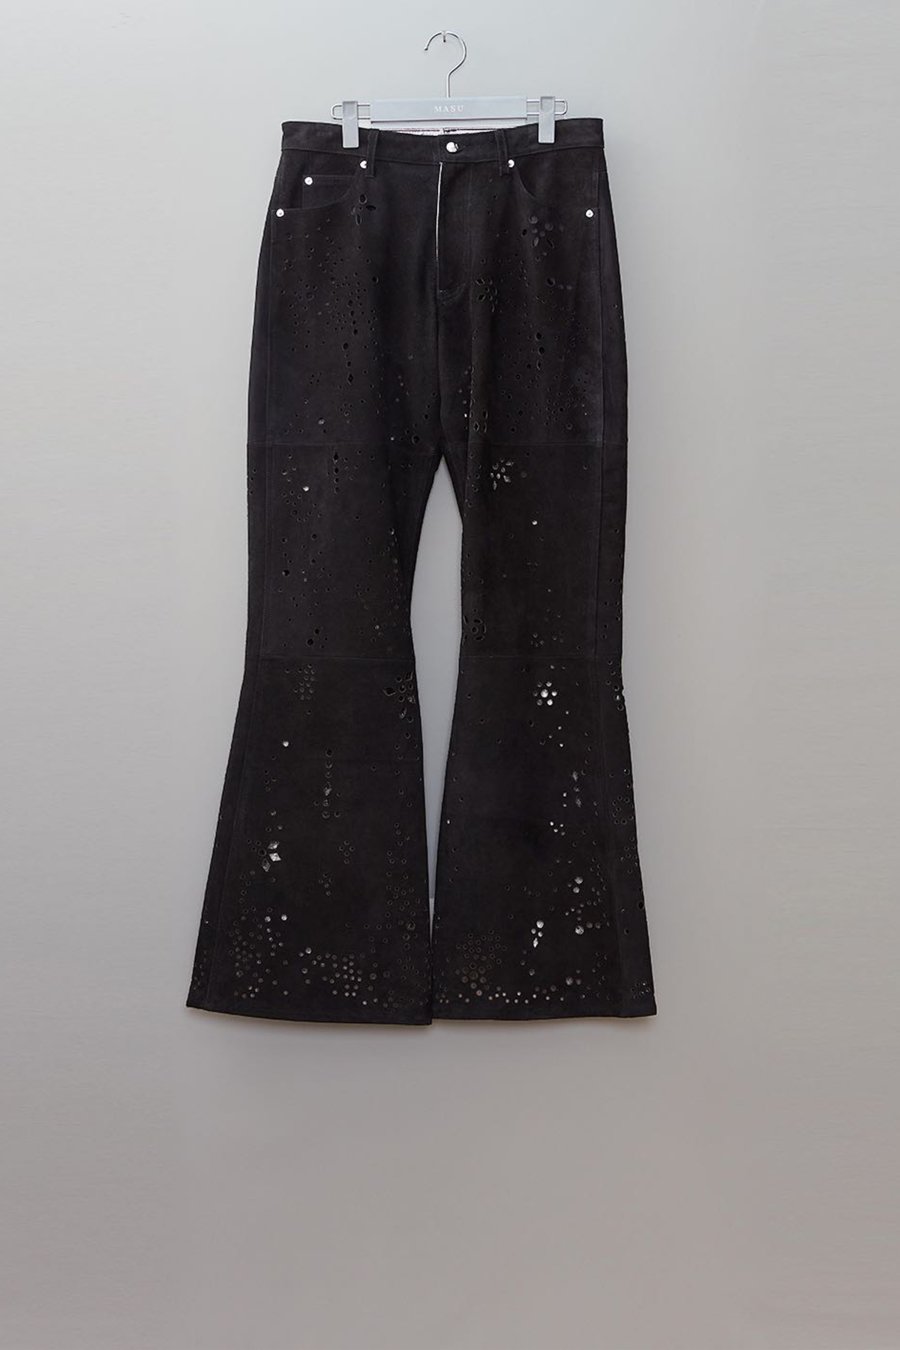 MASU  GALAXY-CUT LEATHER FLARE PANTS(BLACK)<img class='new_mark_img2' src='https://img.shop-pro.jp/img/new/icons15.gif' style='border:none;display:inline;margin:0px;padding:0px;width:auto;' />